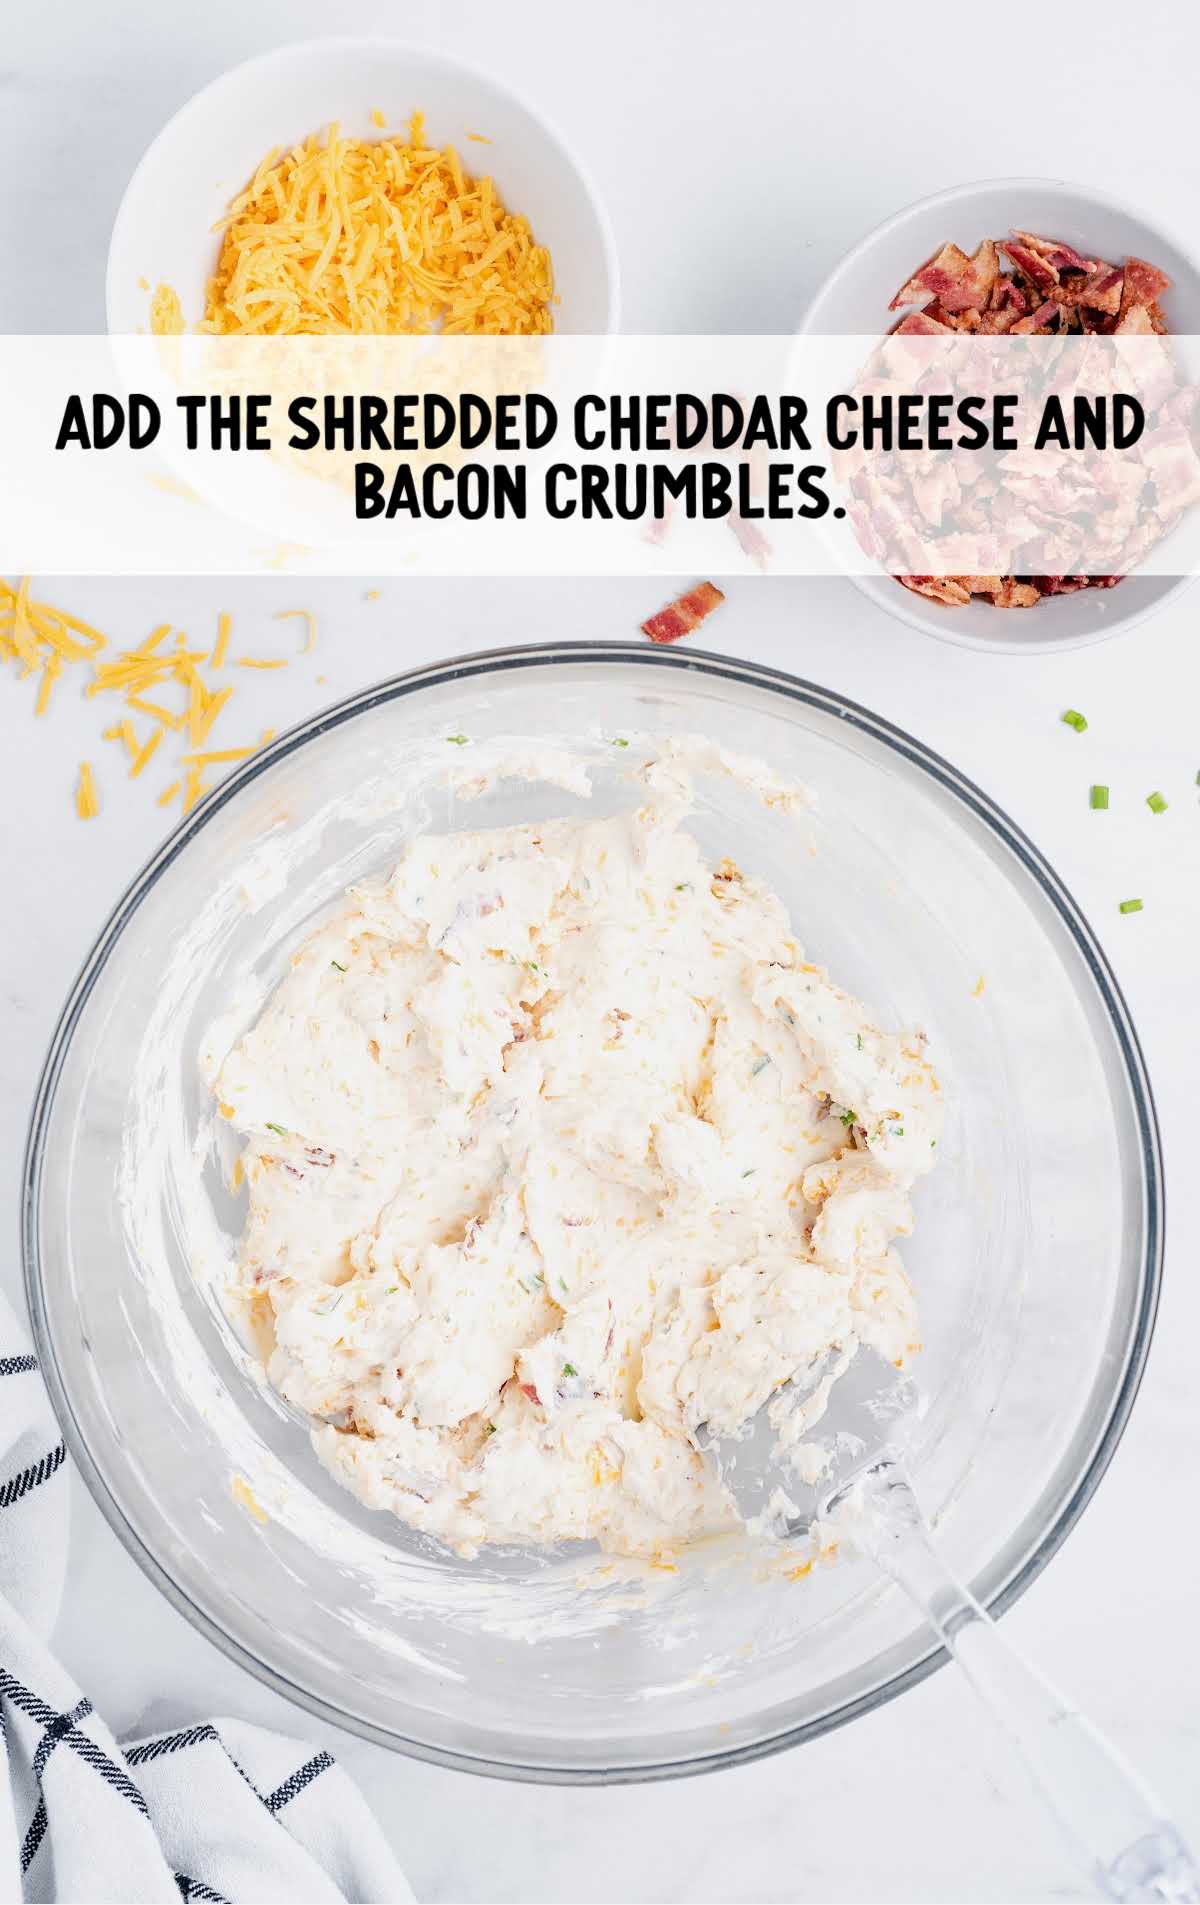 shredded cheddar cheese and bacon crumbs added to the cream cheese mixture